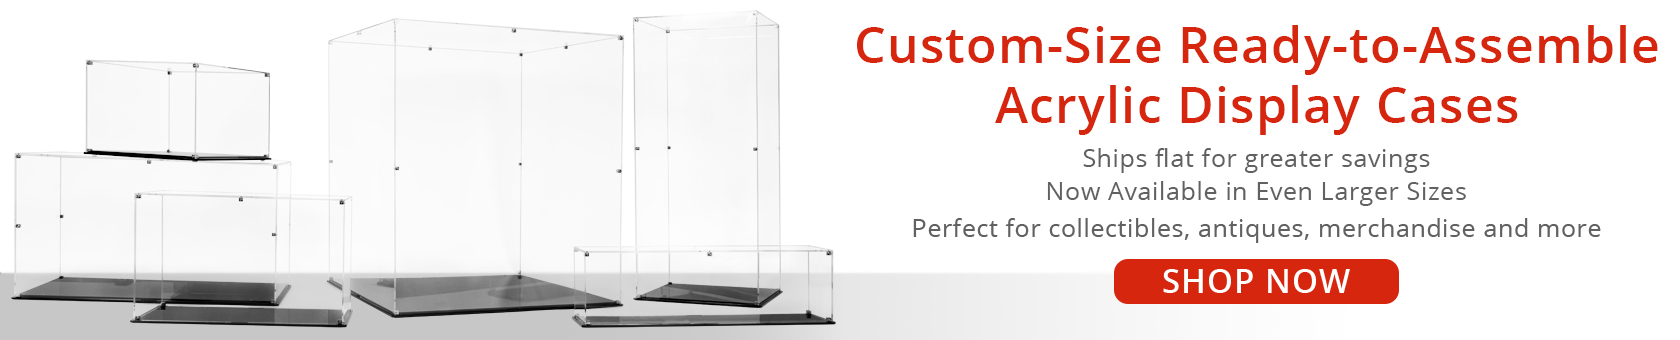 Custom Sized Ready to Assemble Acrylic Display Cases